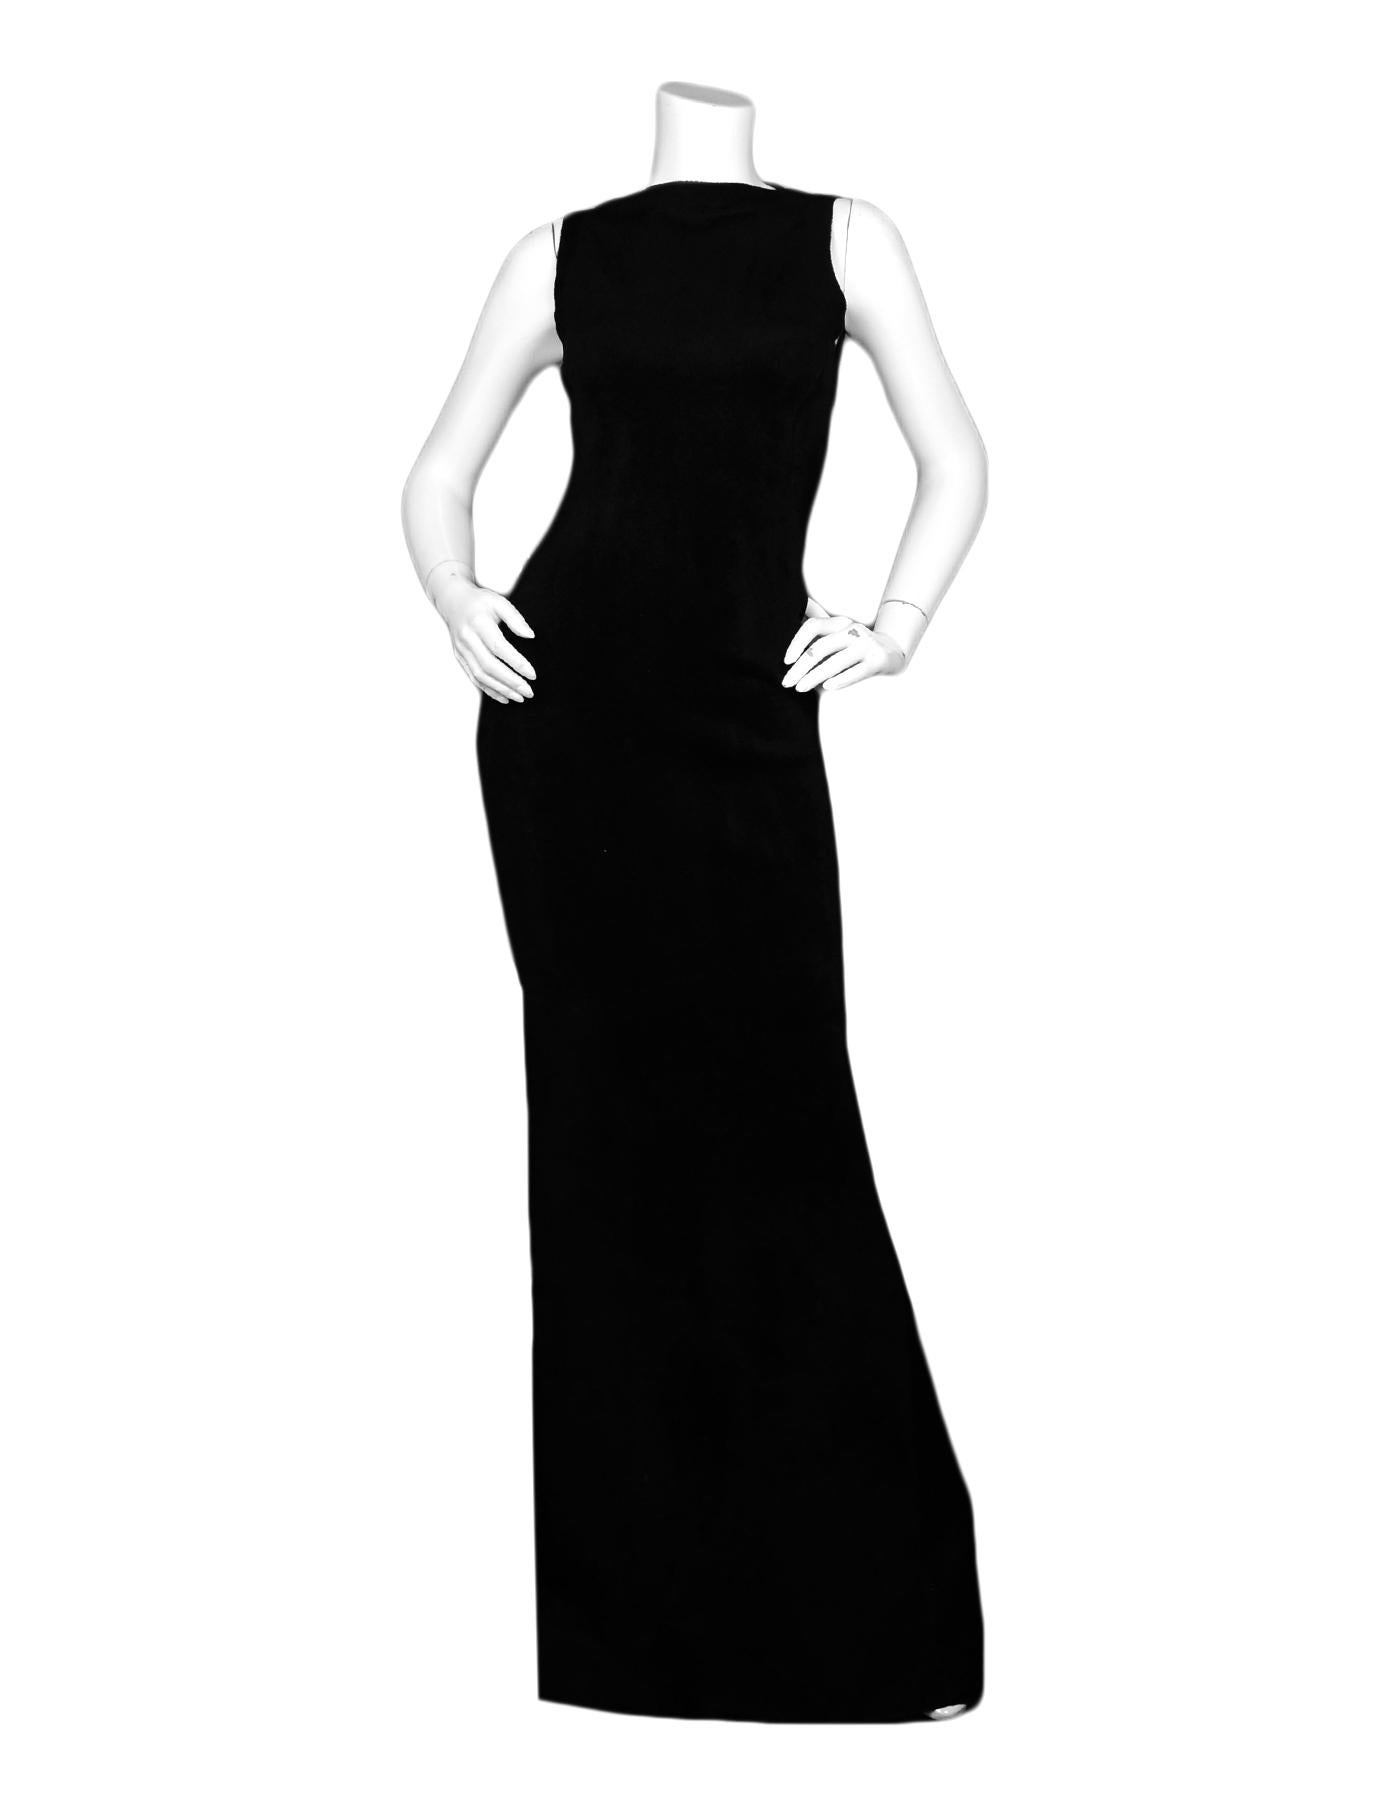 Alaia Black Sleeveless Velvet Gown sz FR 38

Made In: Italy
Color: Black
Materials: 35% Fleece Wool, 35% Viscose, 25% Nyon, 5% Polyester
Lining: 35% Fleece Wool, 35% Viscose, 25% Nyon, 5% Polyester
Opening/Closure: Back zip
Overall Condition: